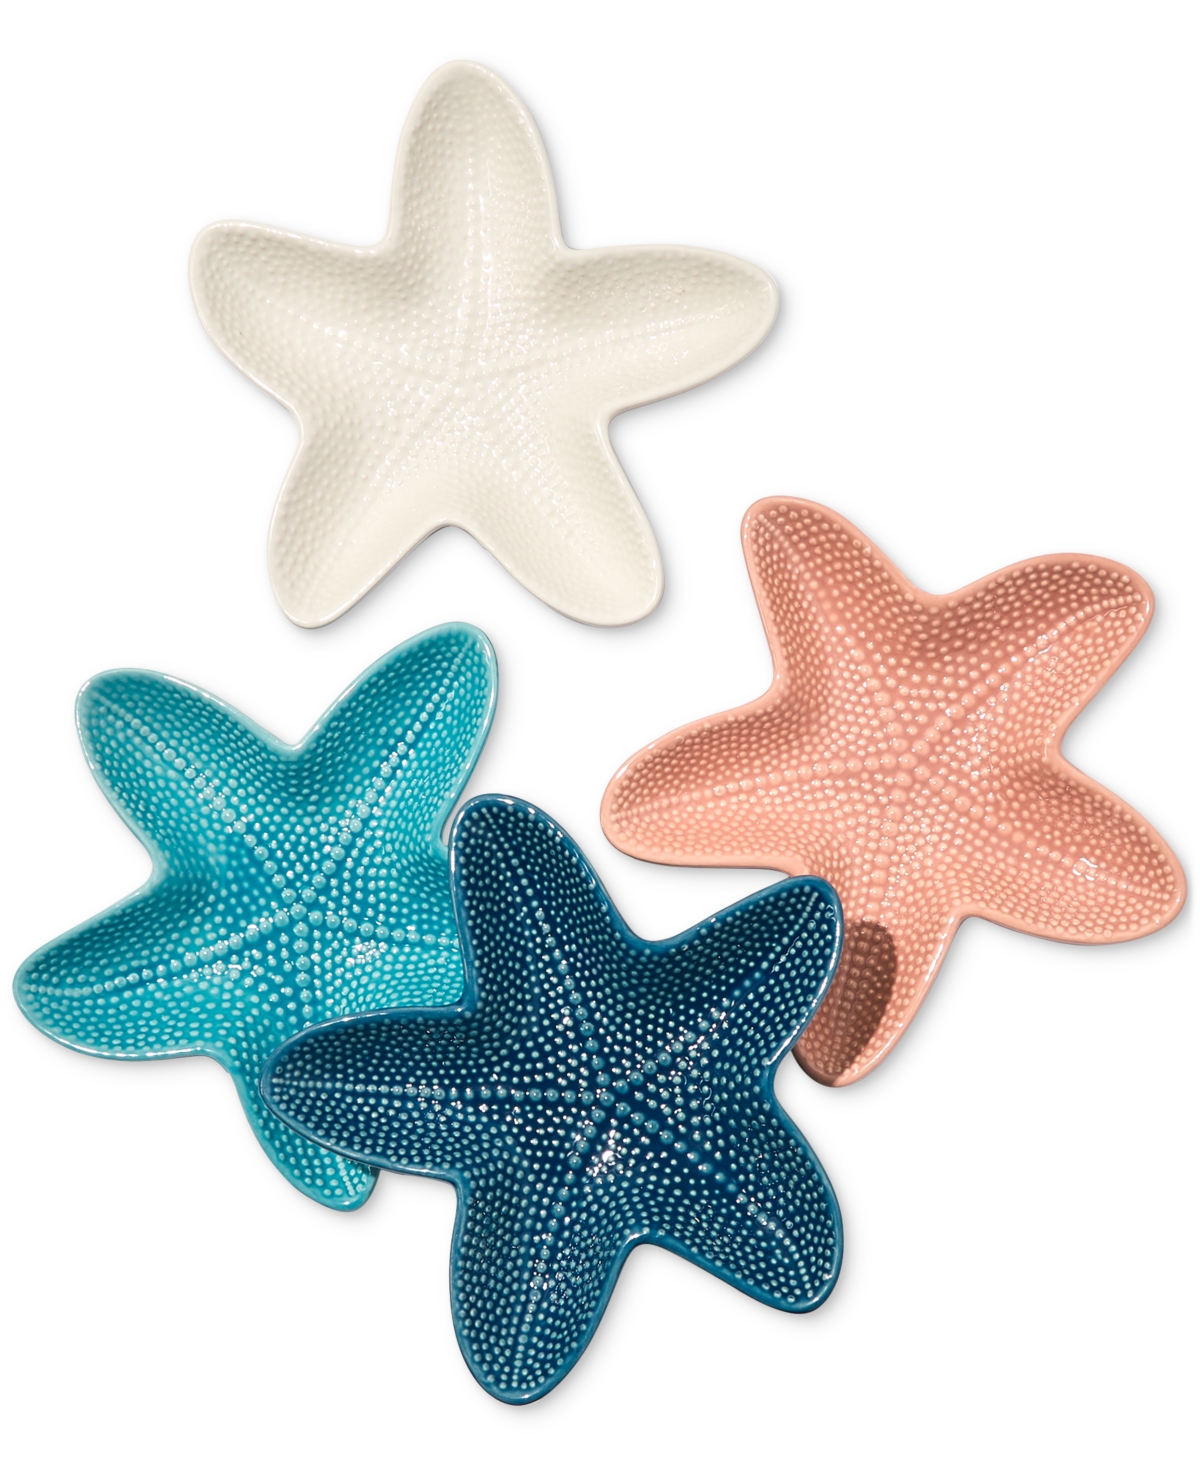 Starfish Appetizer Plates, Set of 4, Created for Macy's